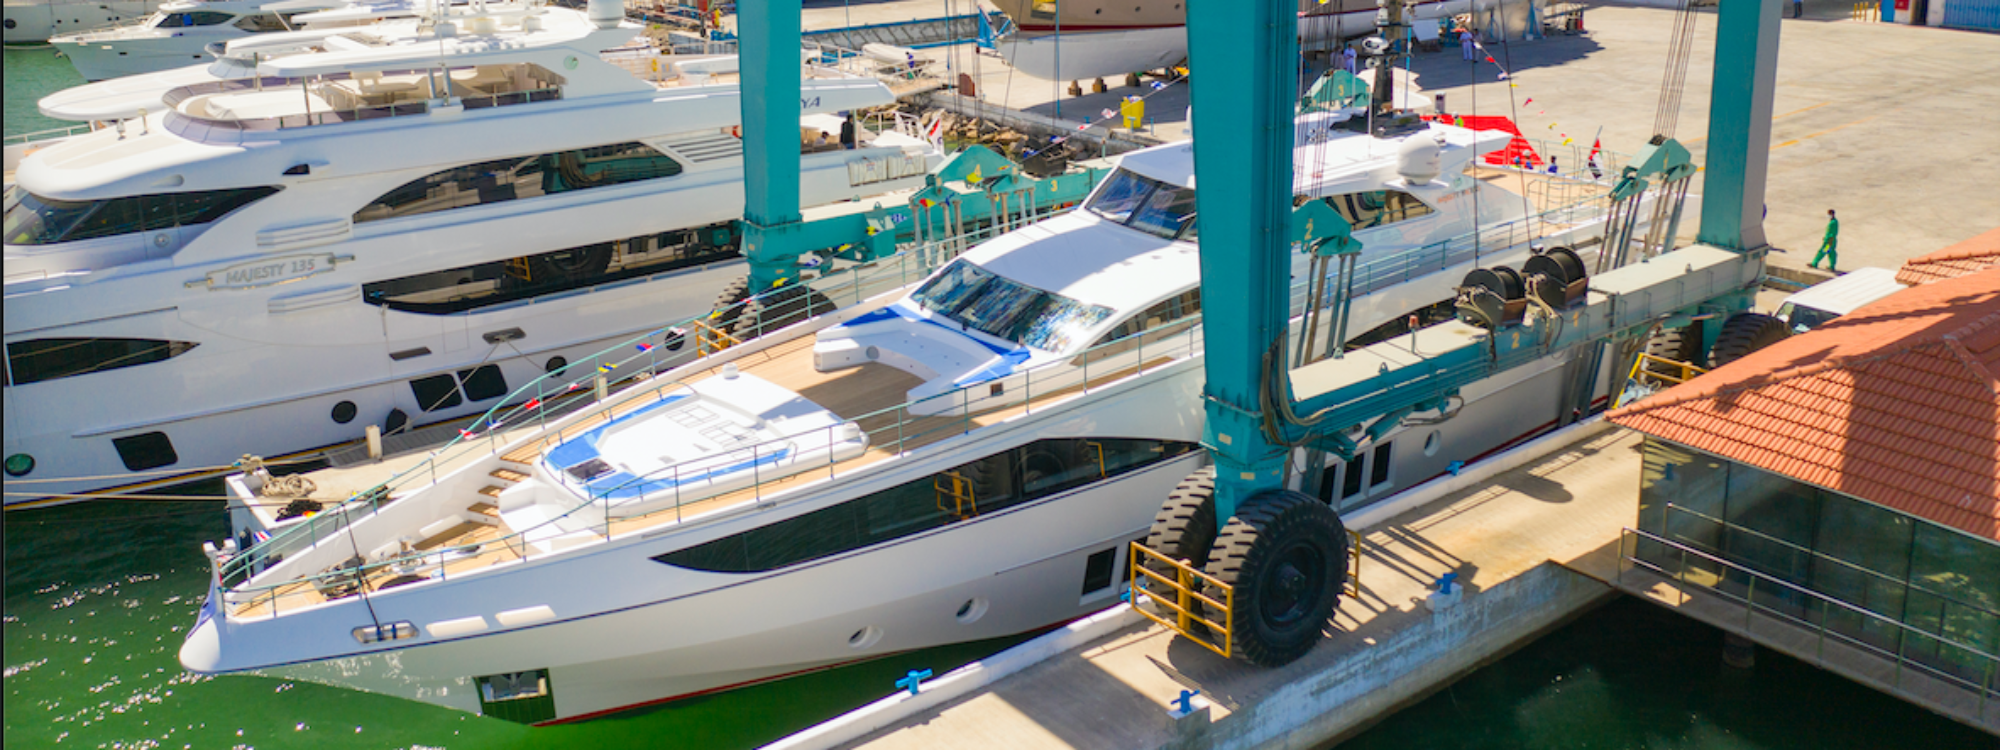 The Majesty 122 is the third 37 m superyacht manufactured by Gulf Craft using Scott Bader’s composite and adhesive materials.